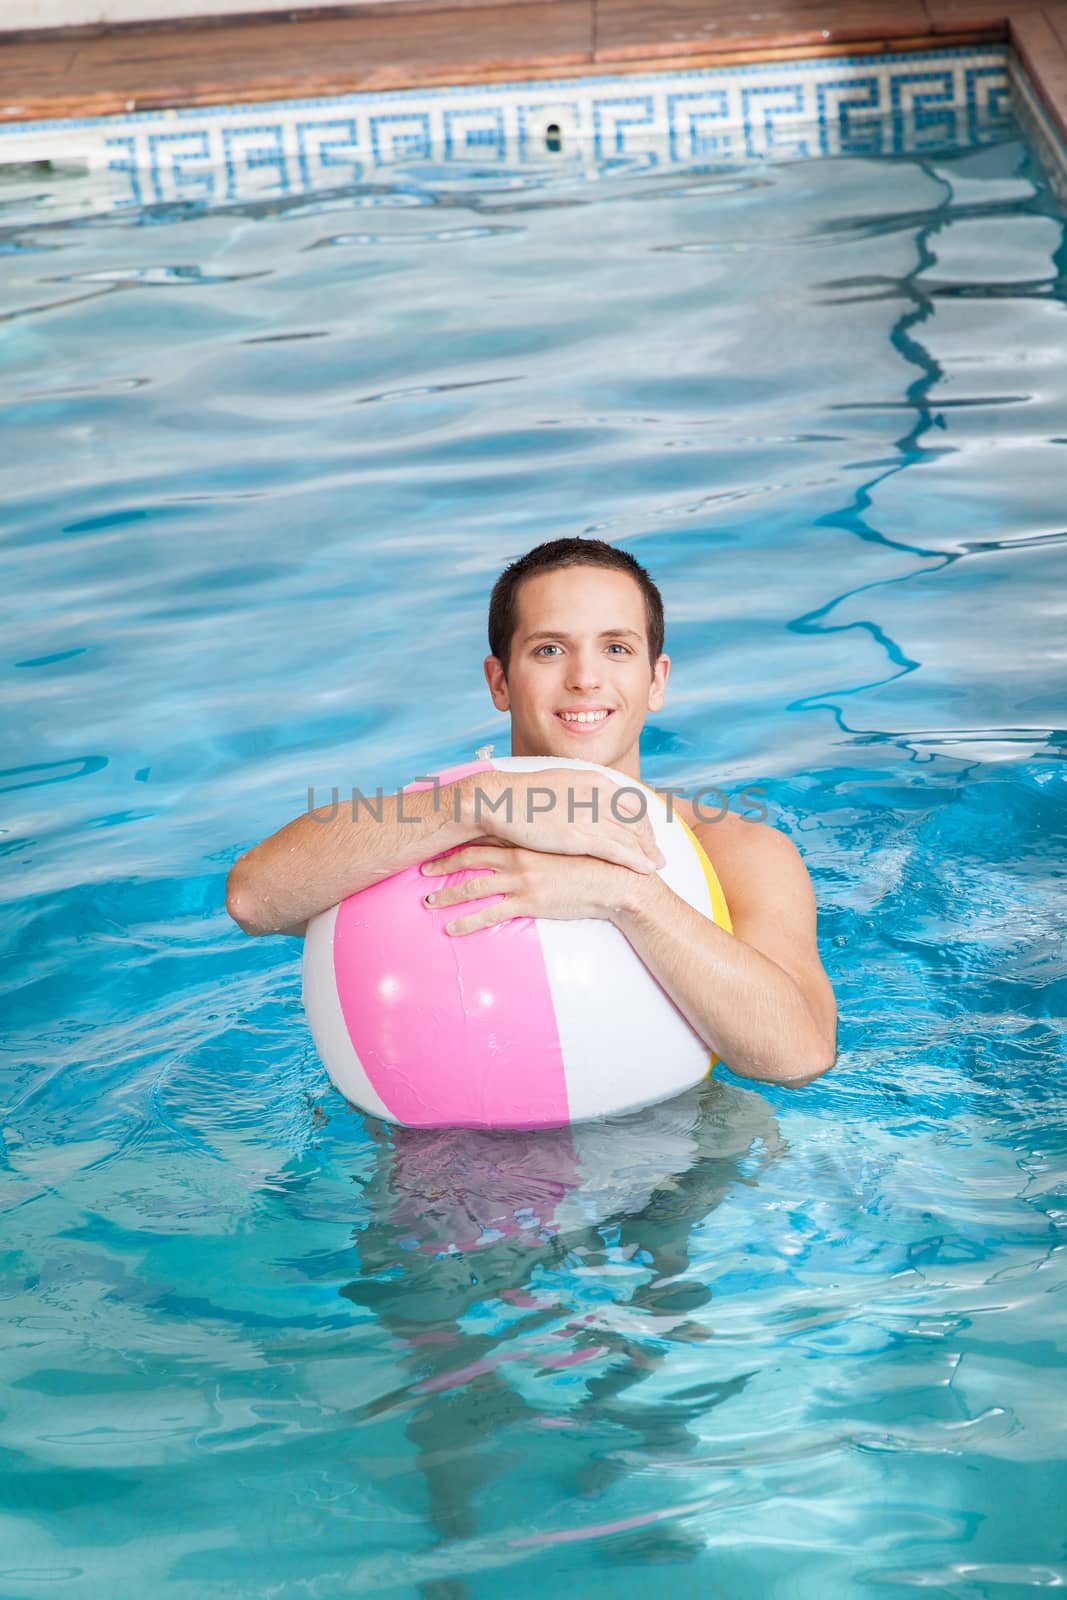 Man in the pool with inflatable ball by ifilms